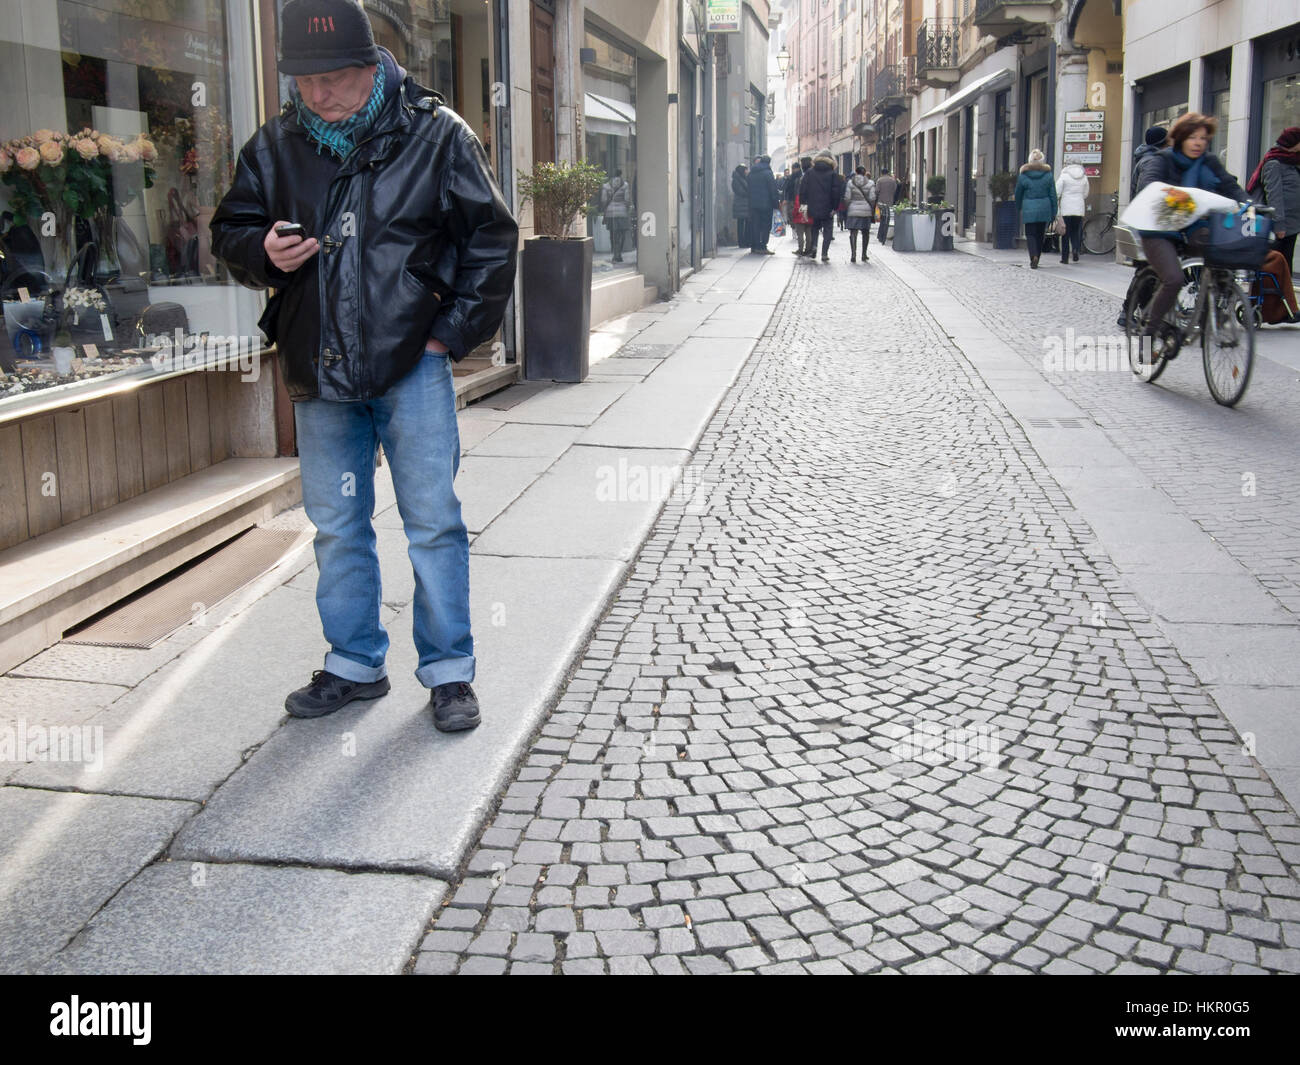 An old man reading a text message on his cellular phone in the street Stock Photo